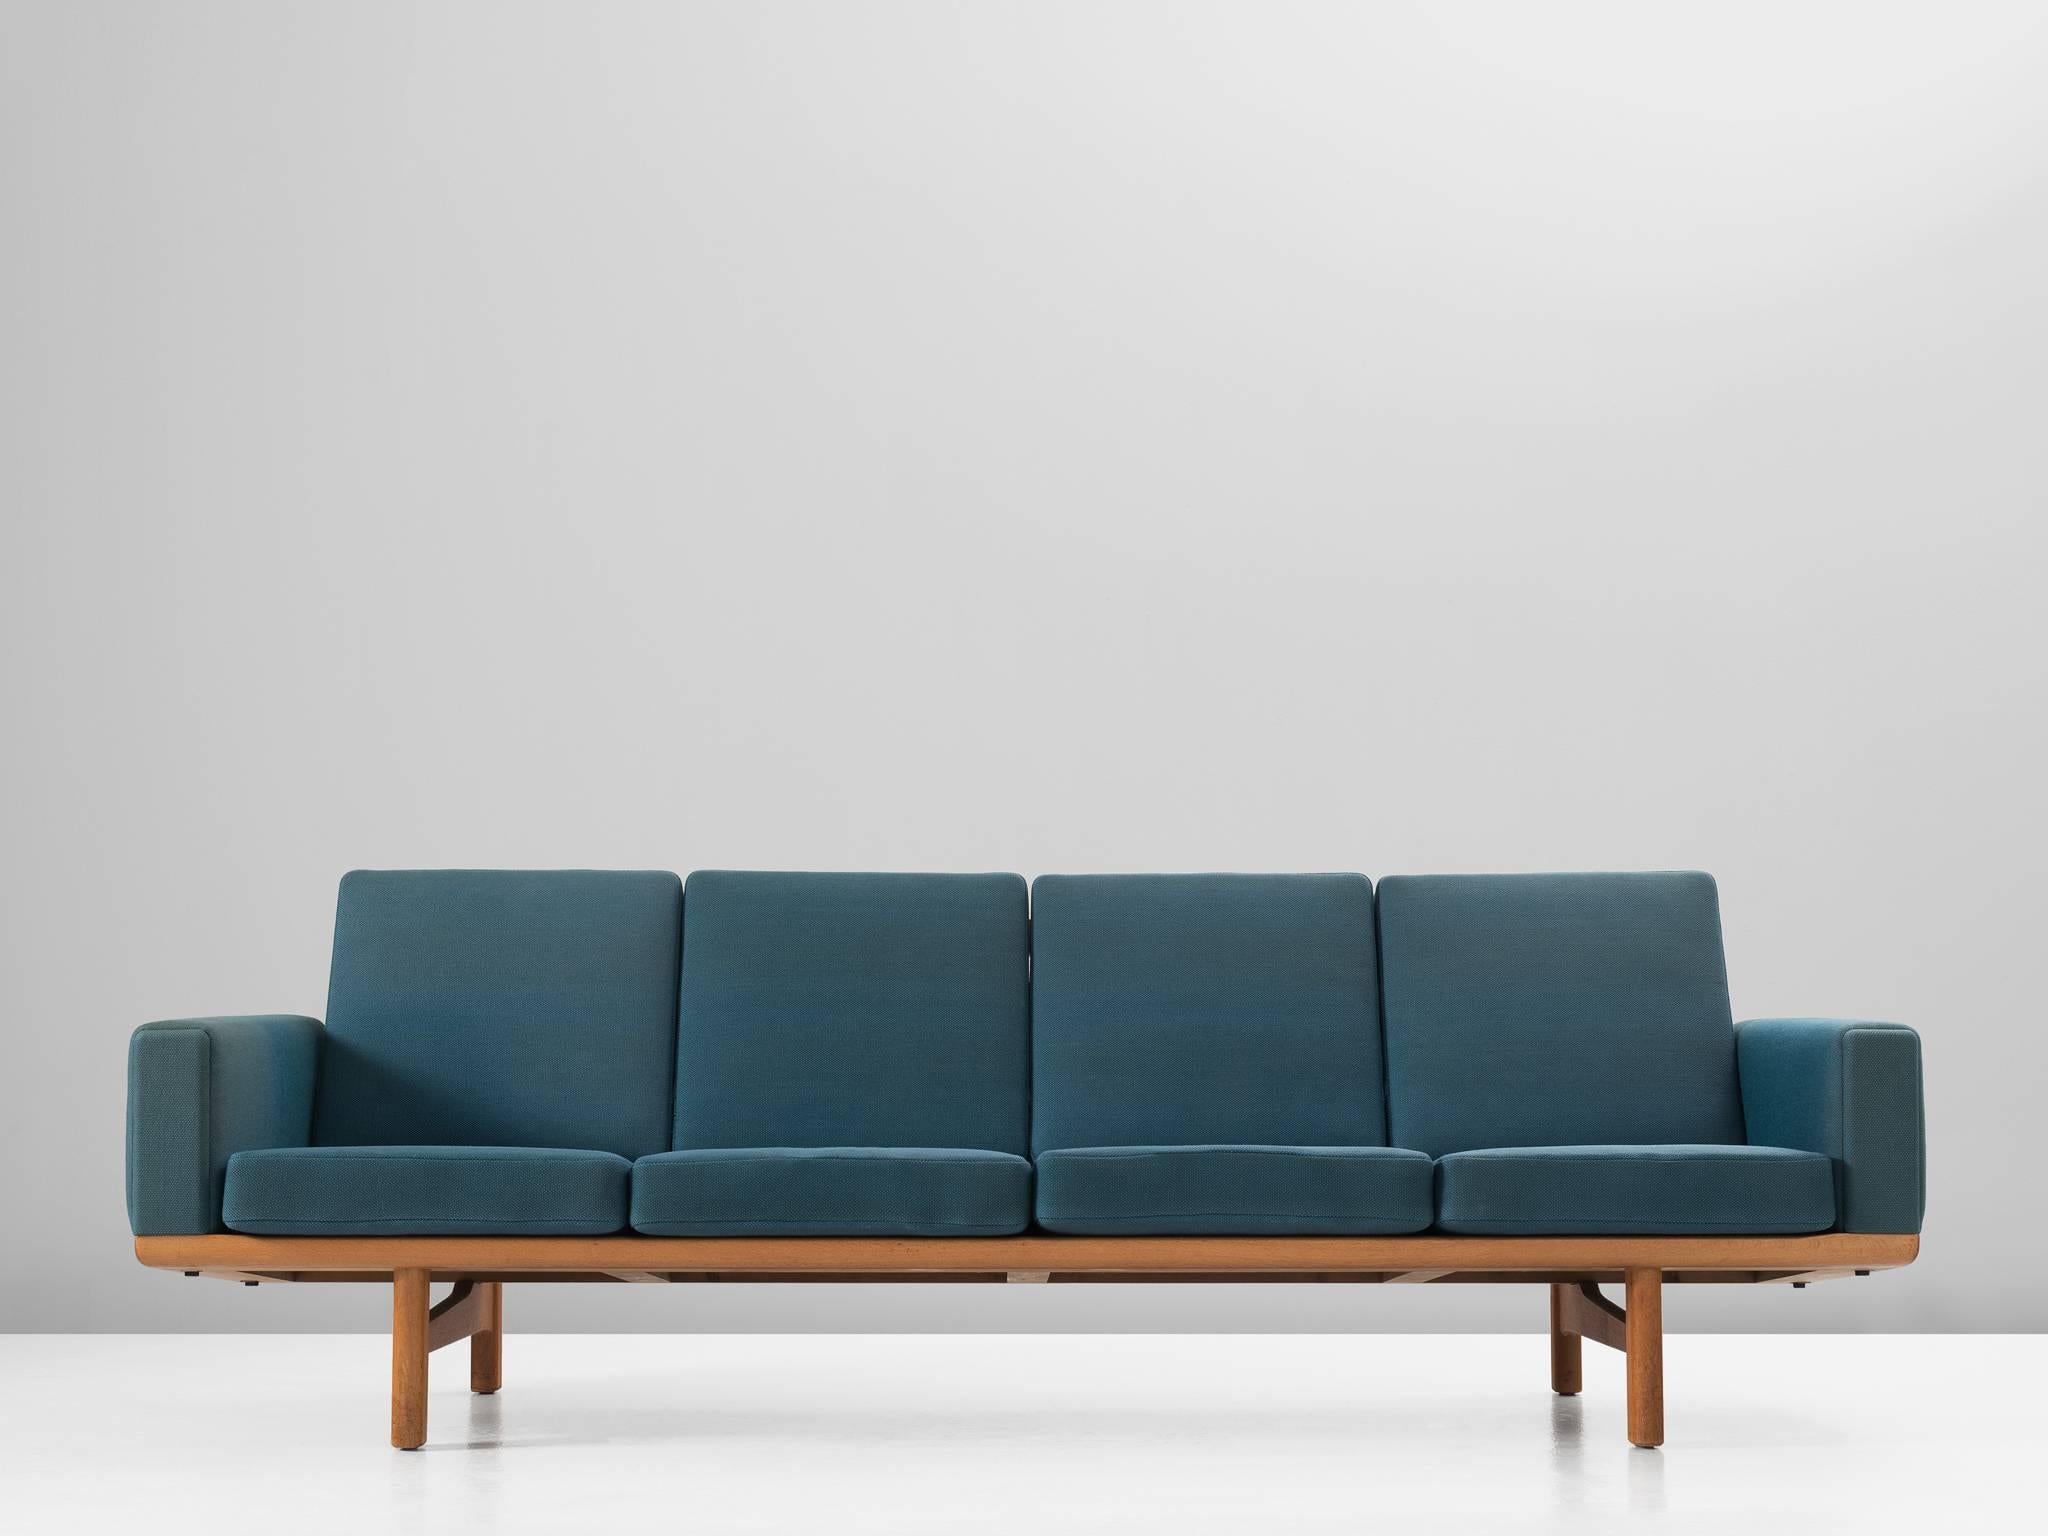 Sofa GE236/4, in oak and fabric, by Hans Wegner for GETAMA, Denmark, 1950s. 

Sofa designed by Hans Wegner for GETAMA. This sofa has a solid oak frame with real nice construction details. Due to the high legs and the low but detailed back, this sofa